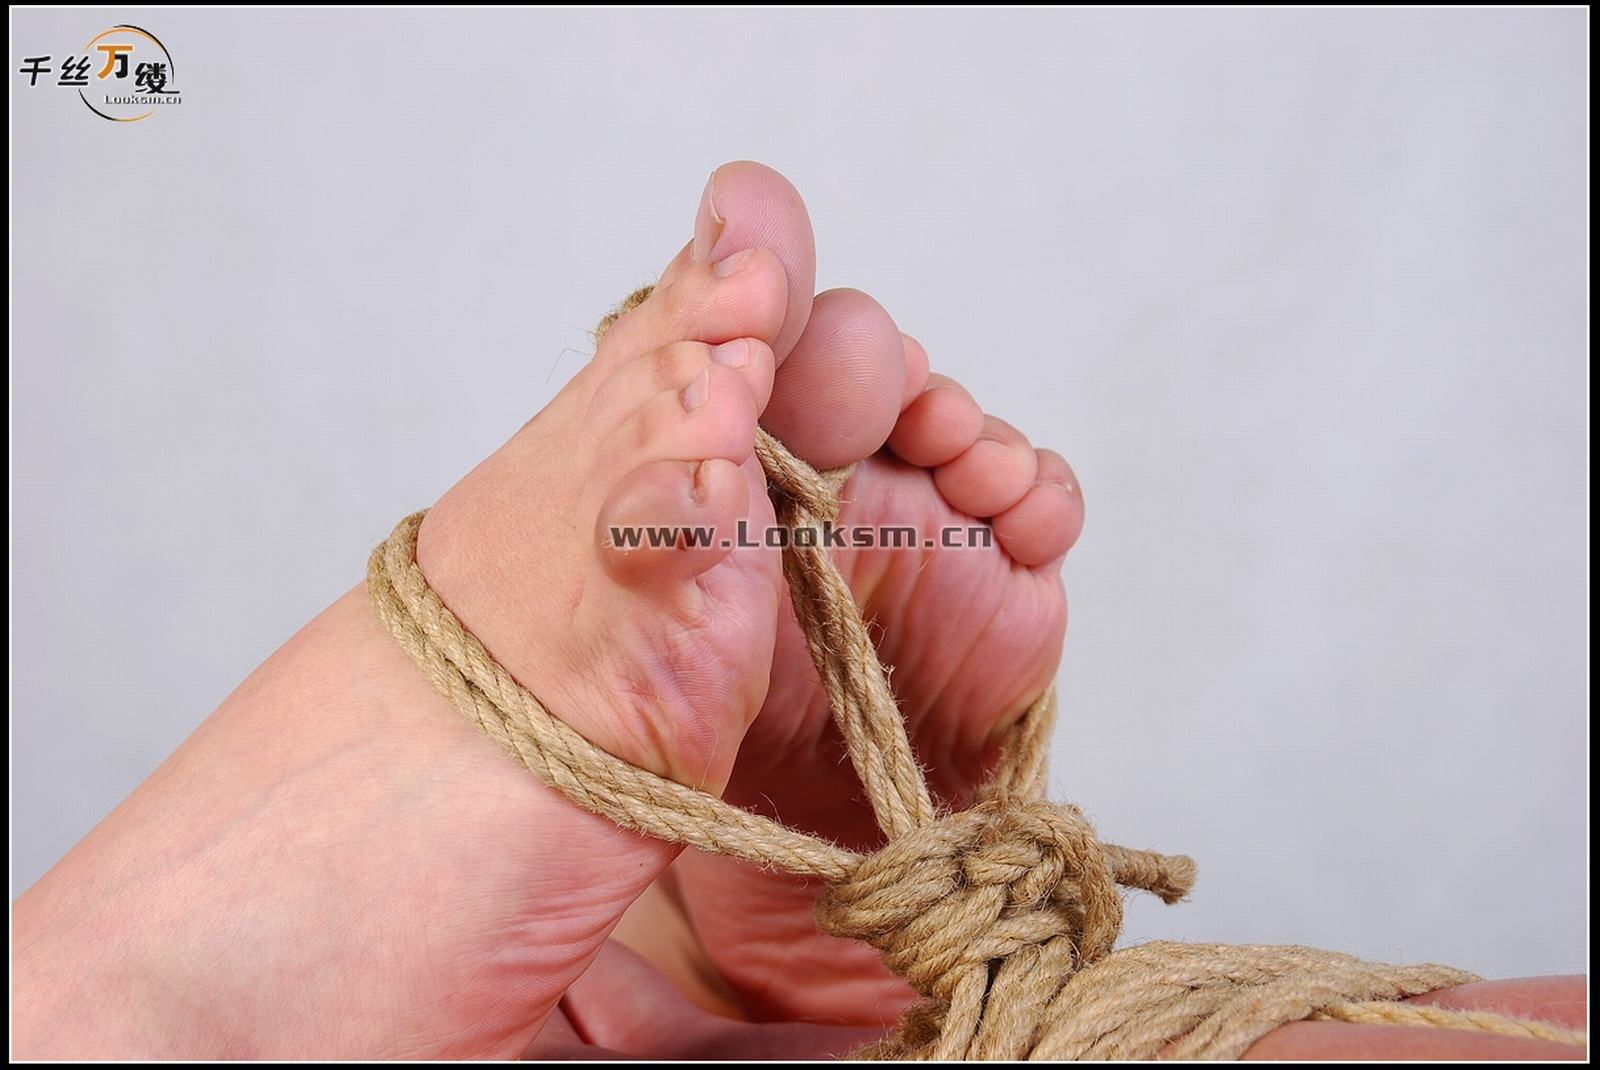 Chinese Rope Model 267